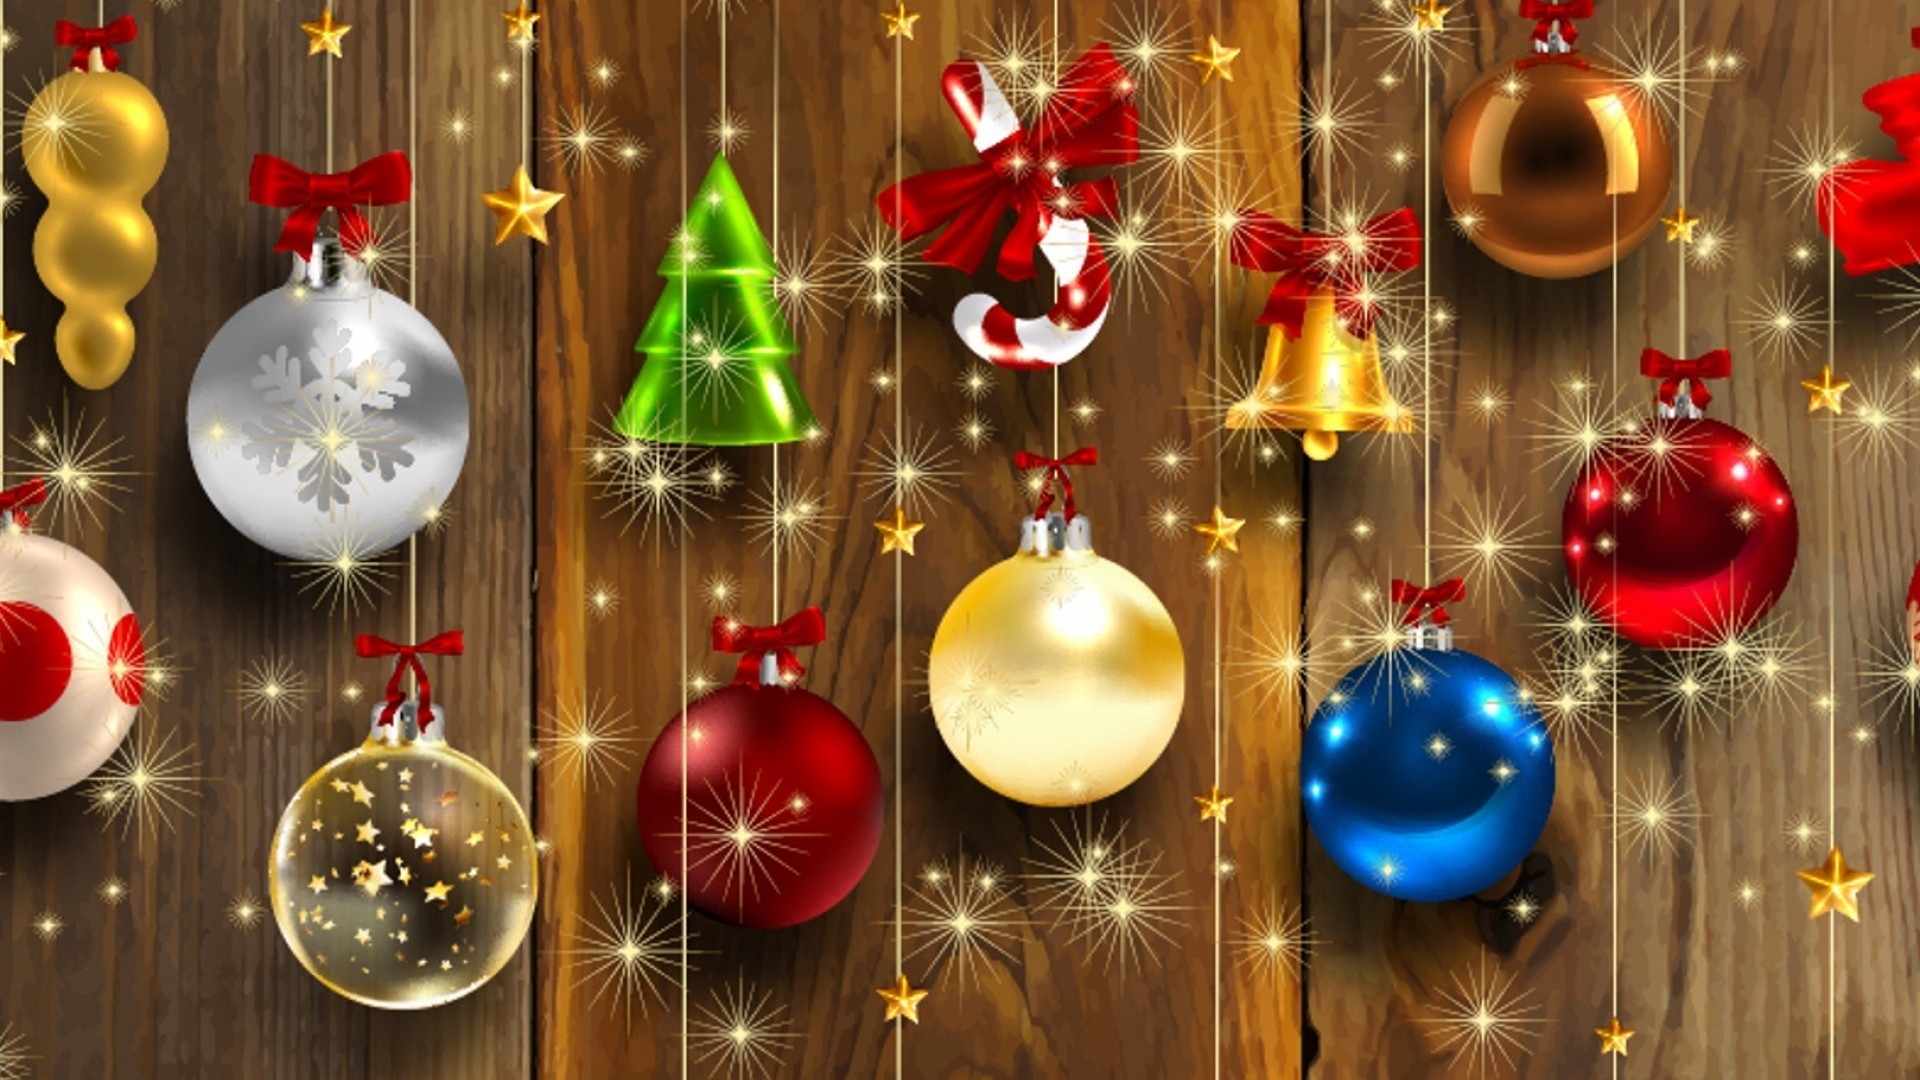 2013 Christmas Ornaments for 1920 x 1080 HDTV 1080p resolution